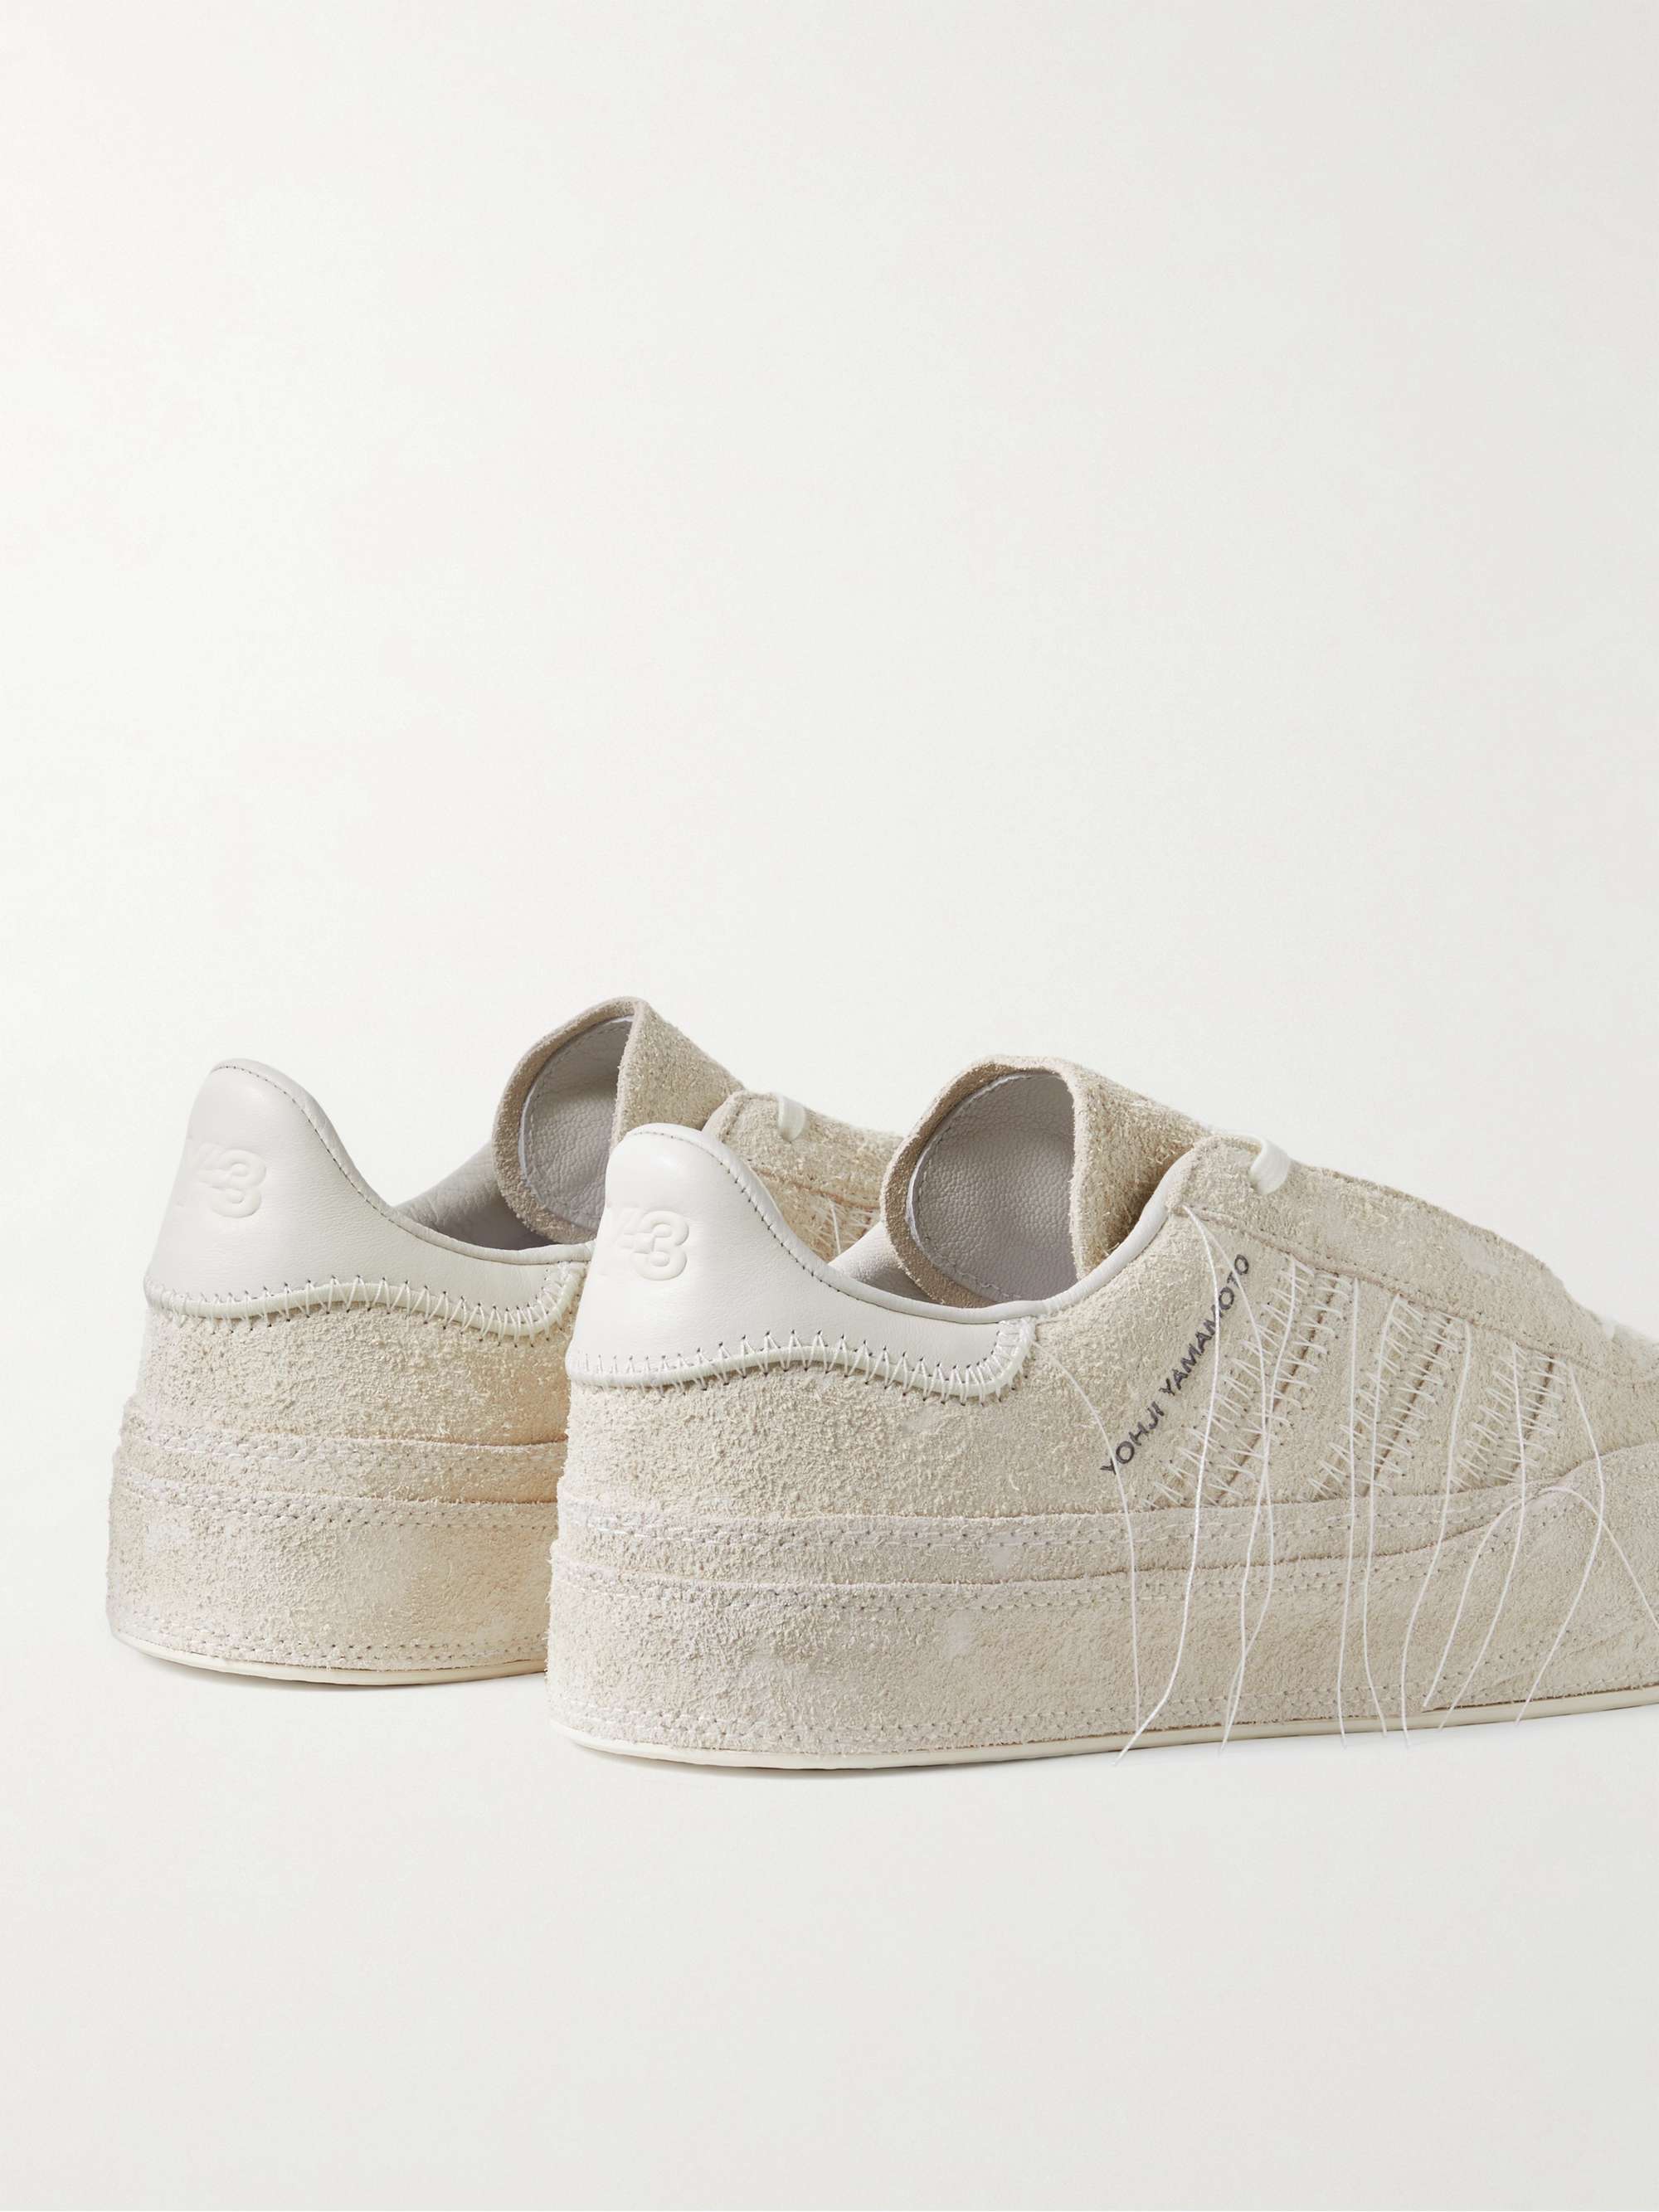 Y-3 Gazelle Distressed Leather-Trimmed Suede Sneakers | MR PORTER